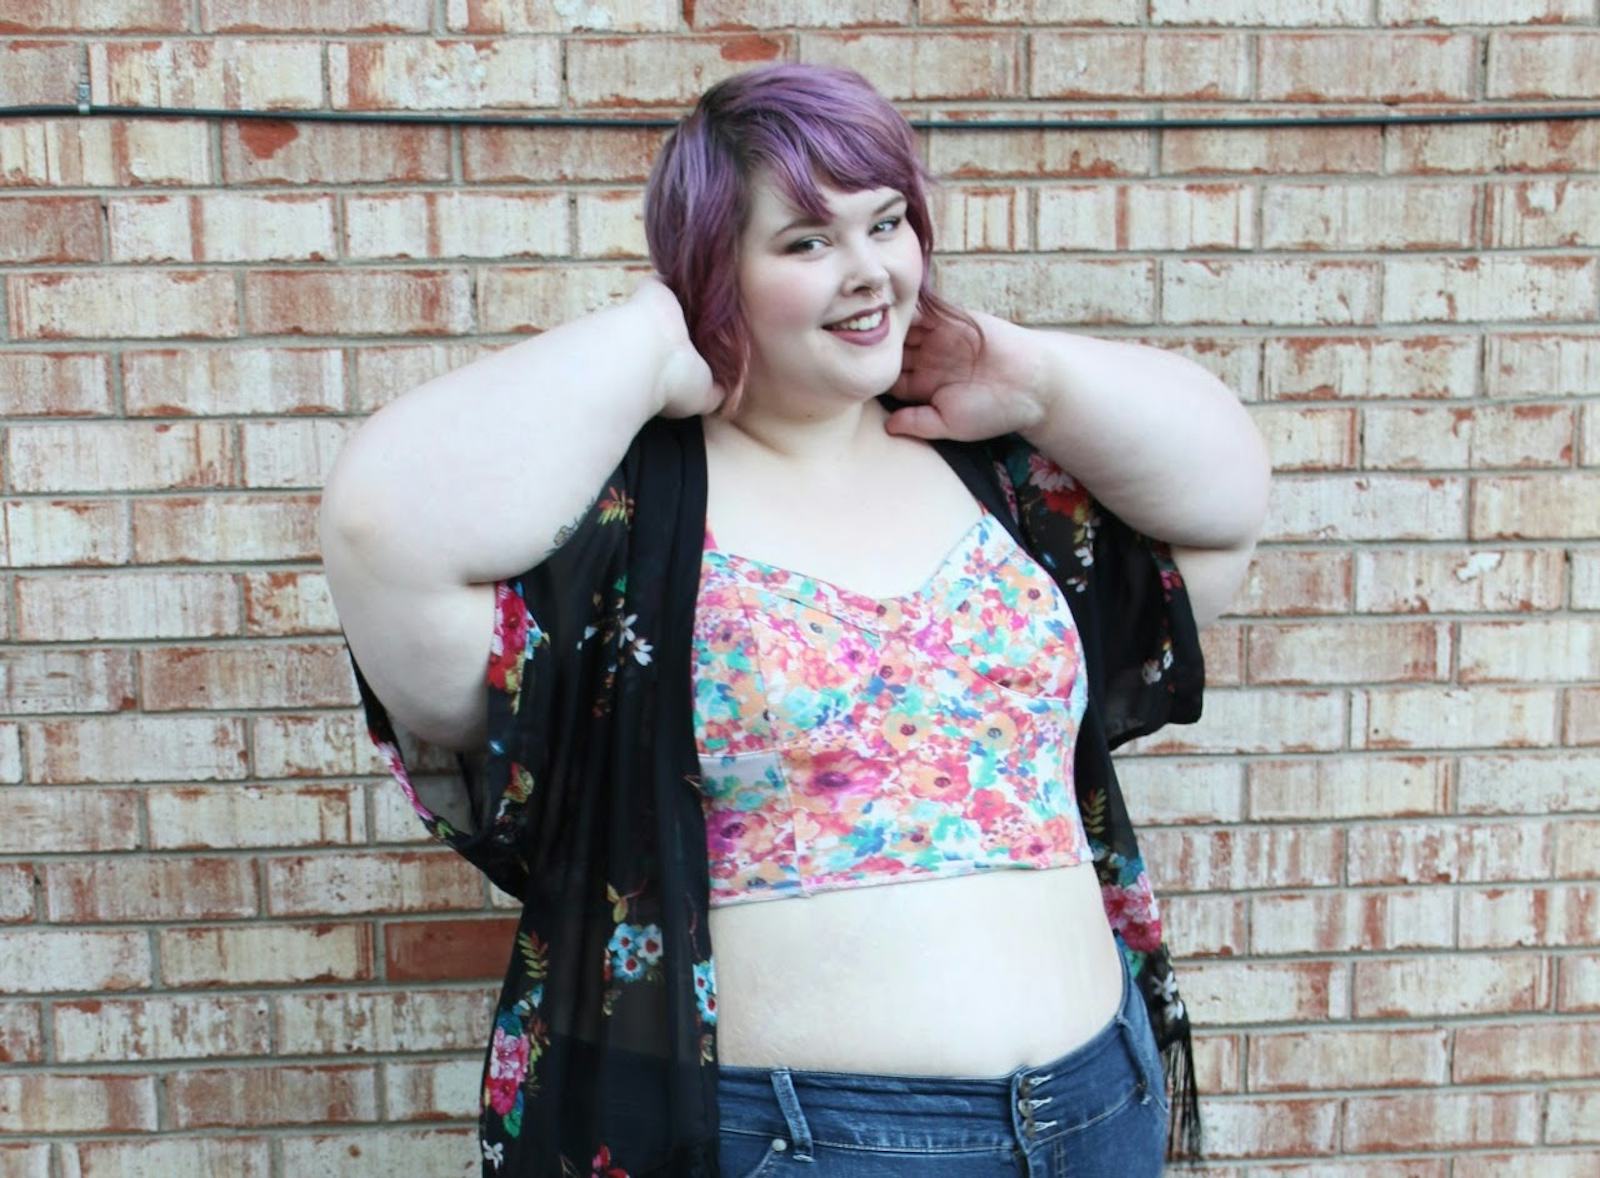 56 Photos Of Plus Size Individuals With Small Boobs Because Fat 0879